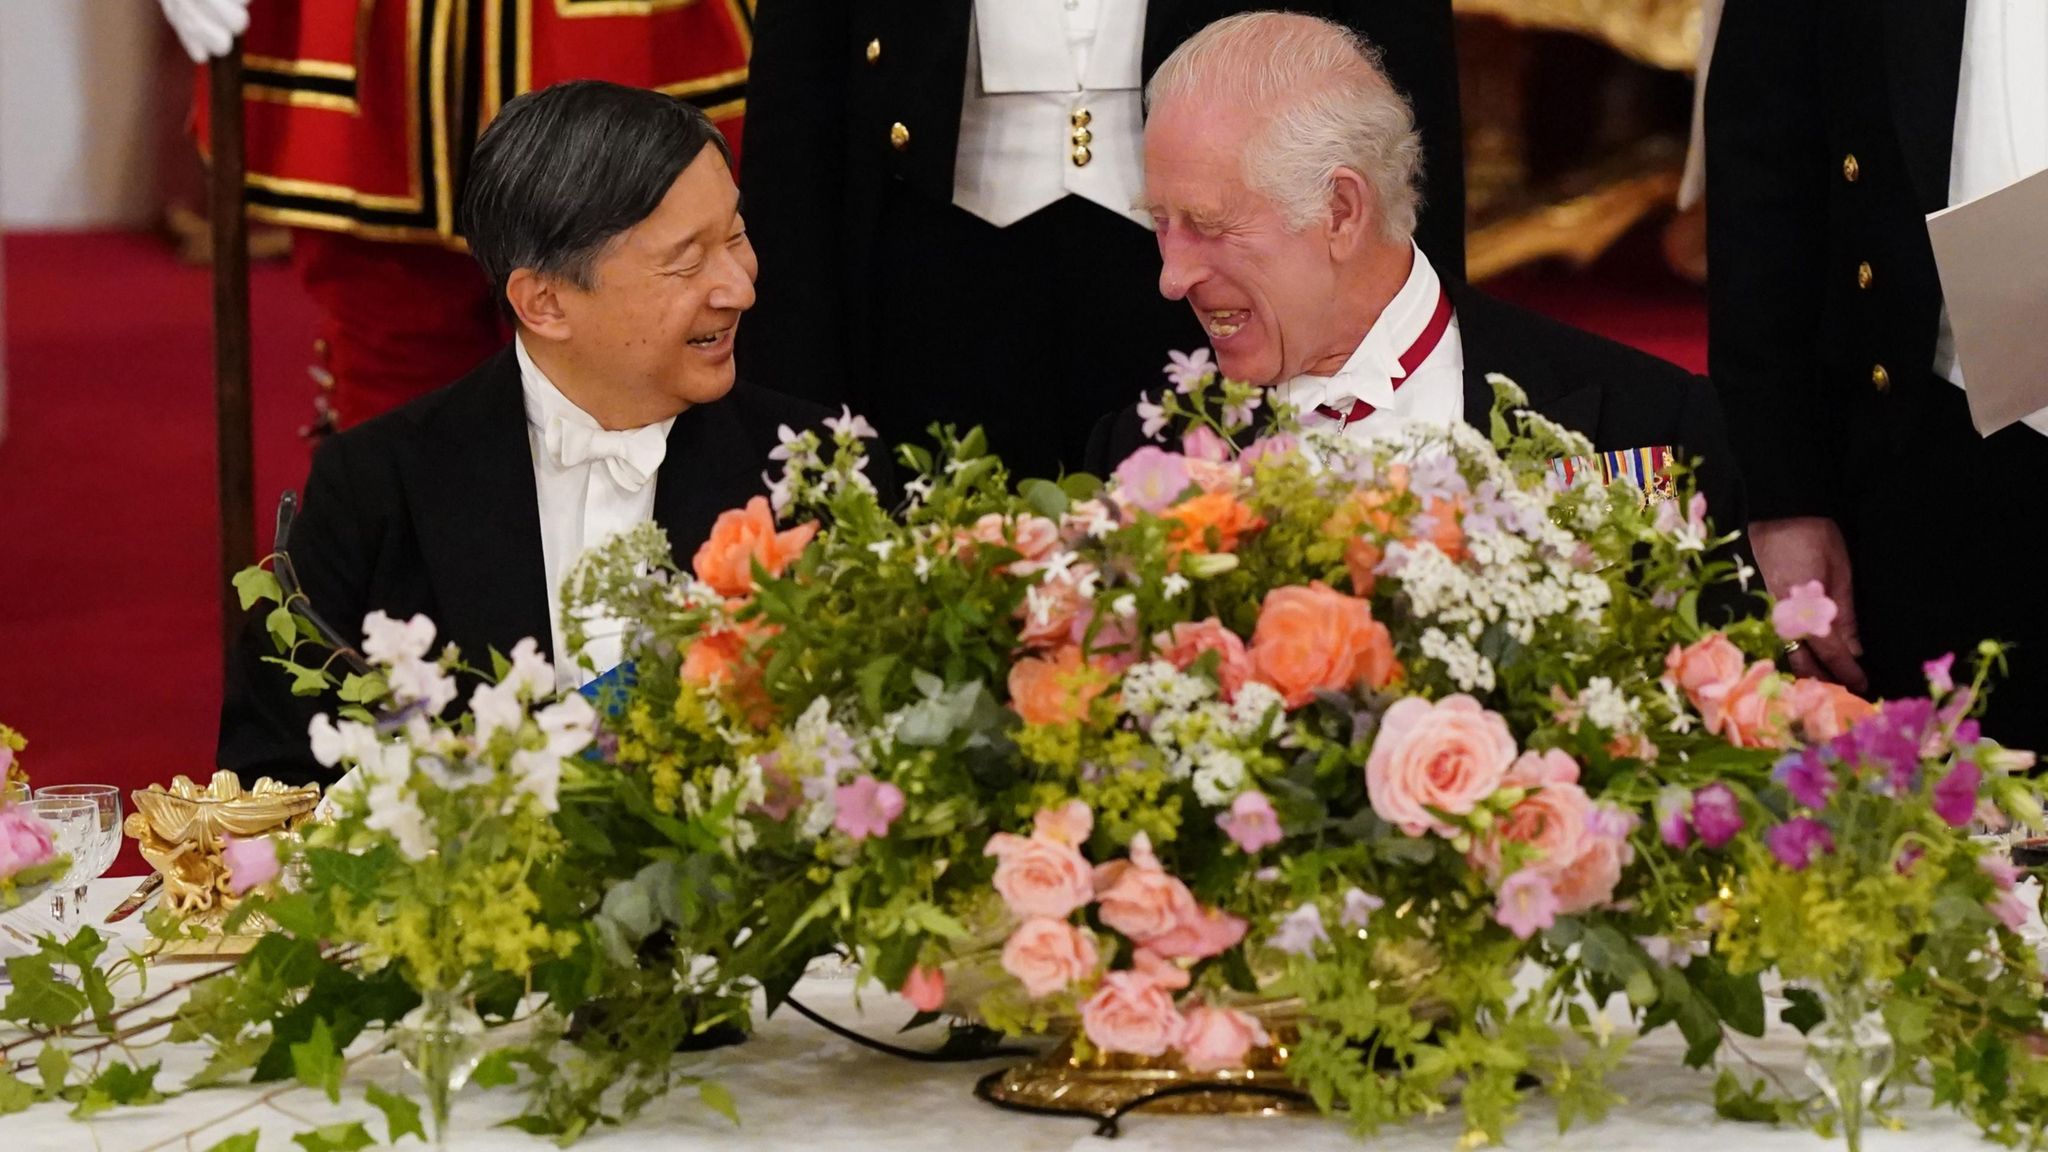 The Emperor and King laughing together, sat next to a large bouquet of flowers